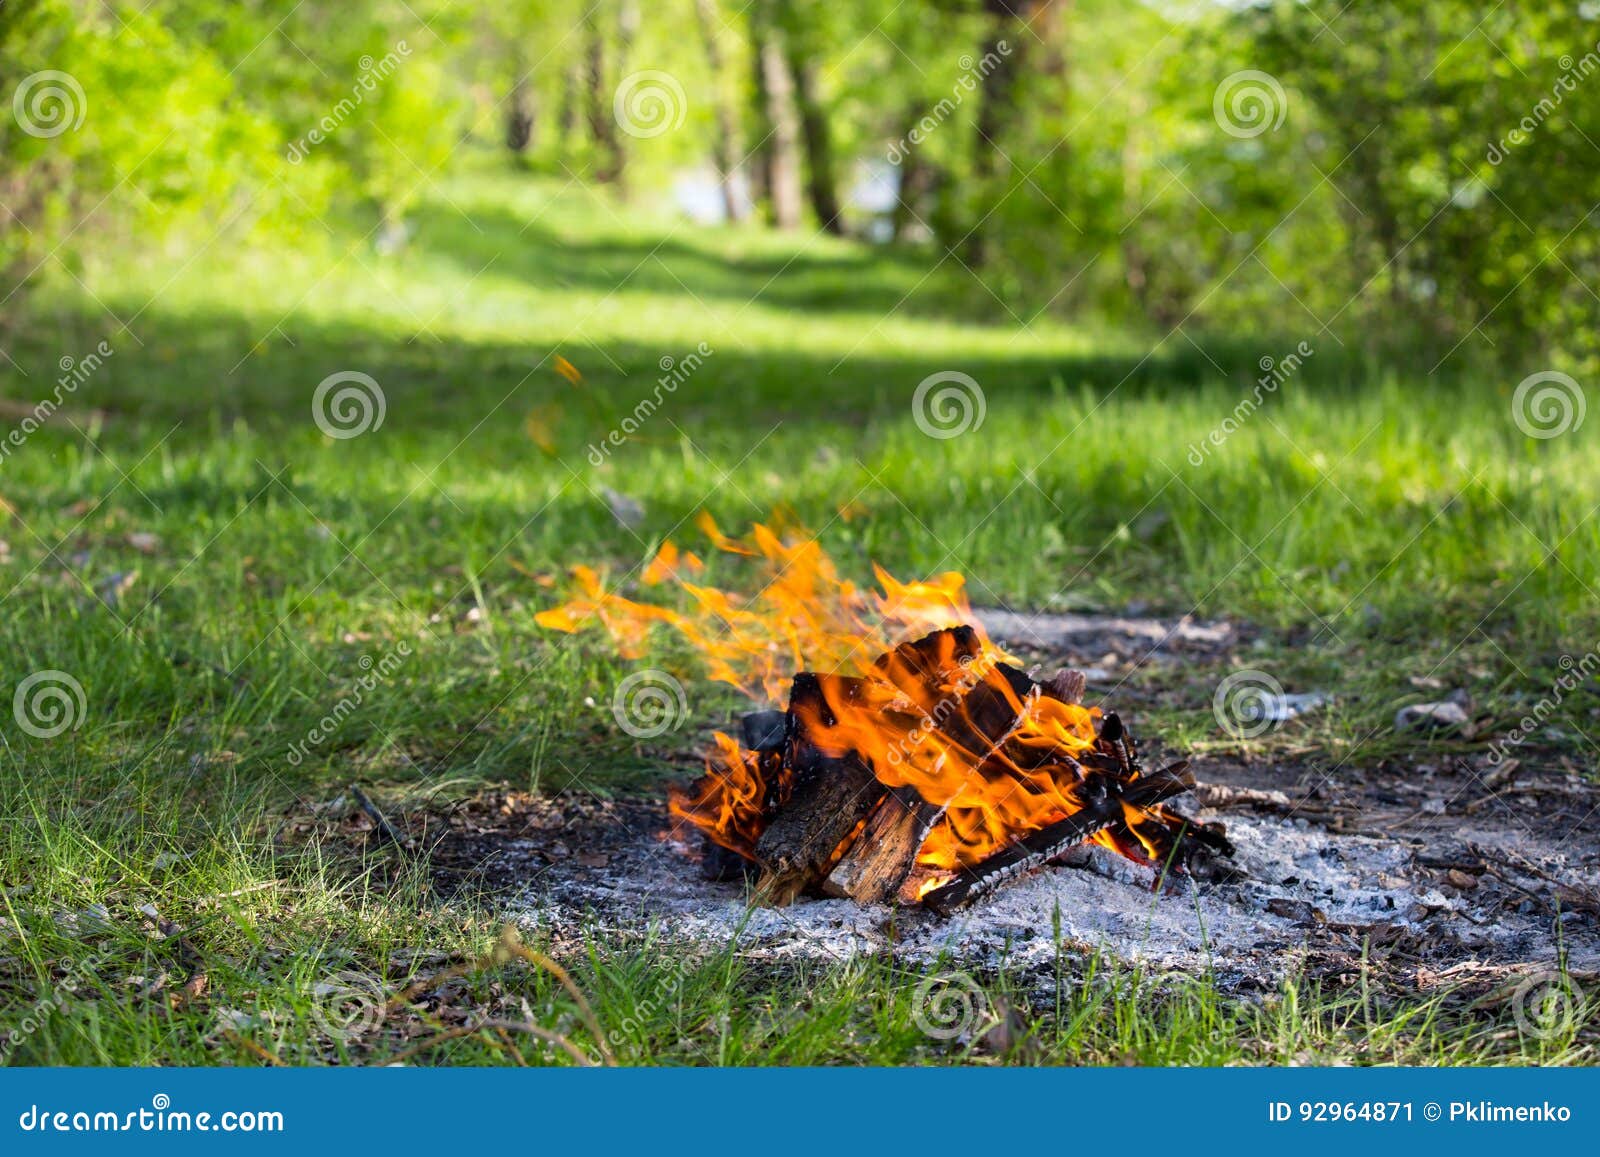 Campfire on Green Meadow in Forest Stock Image - Image of coal, energy ...